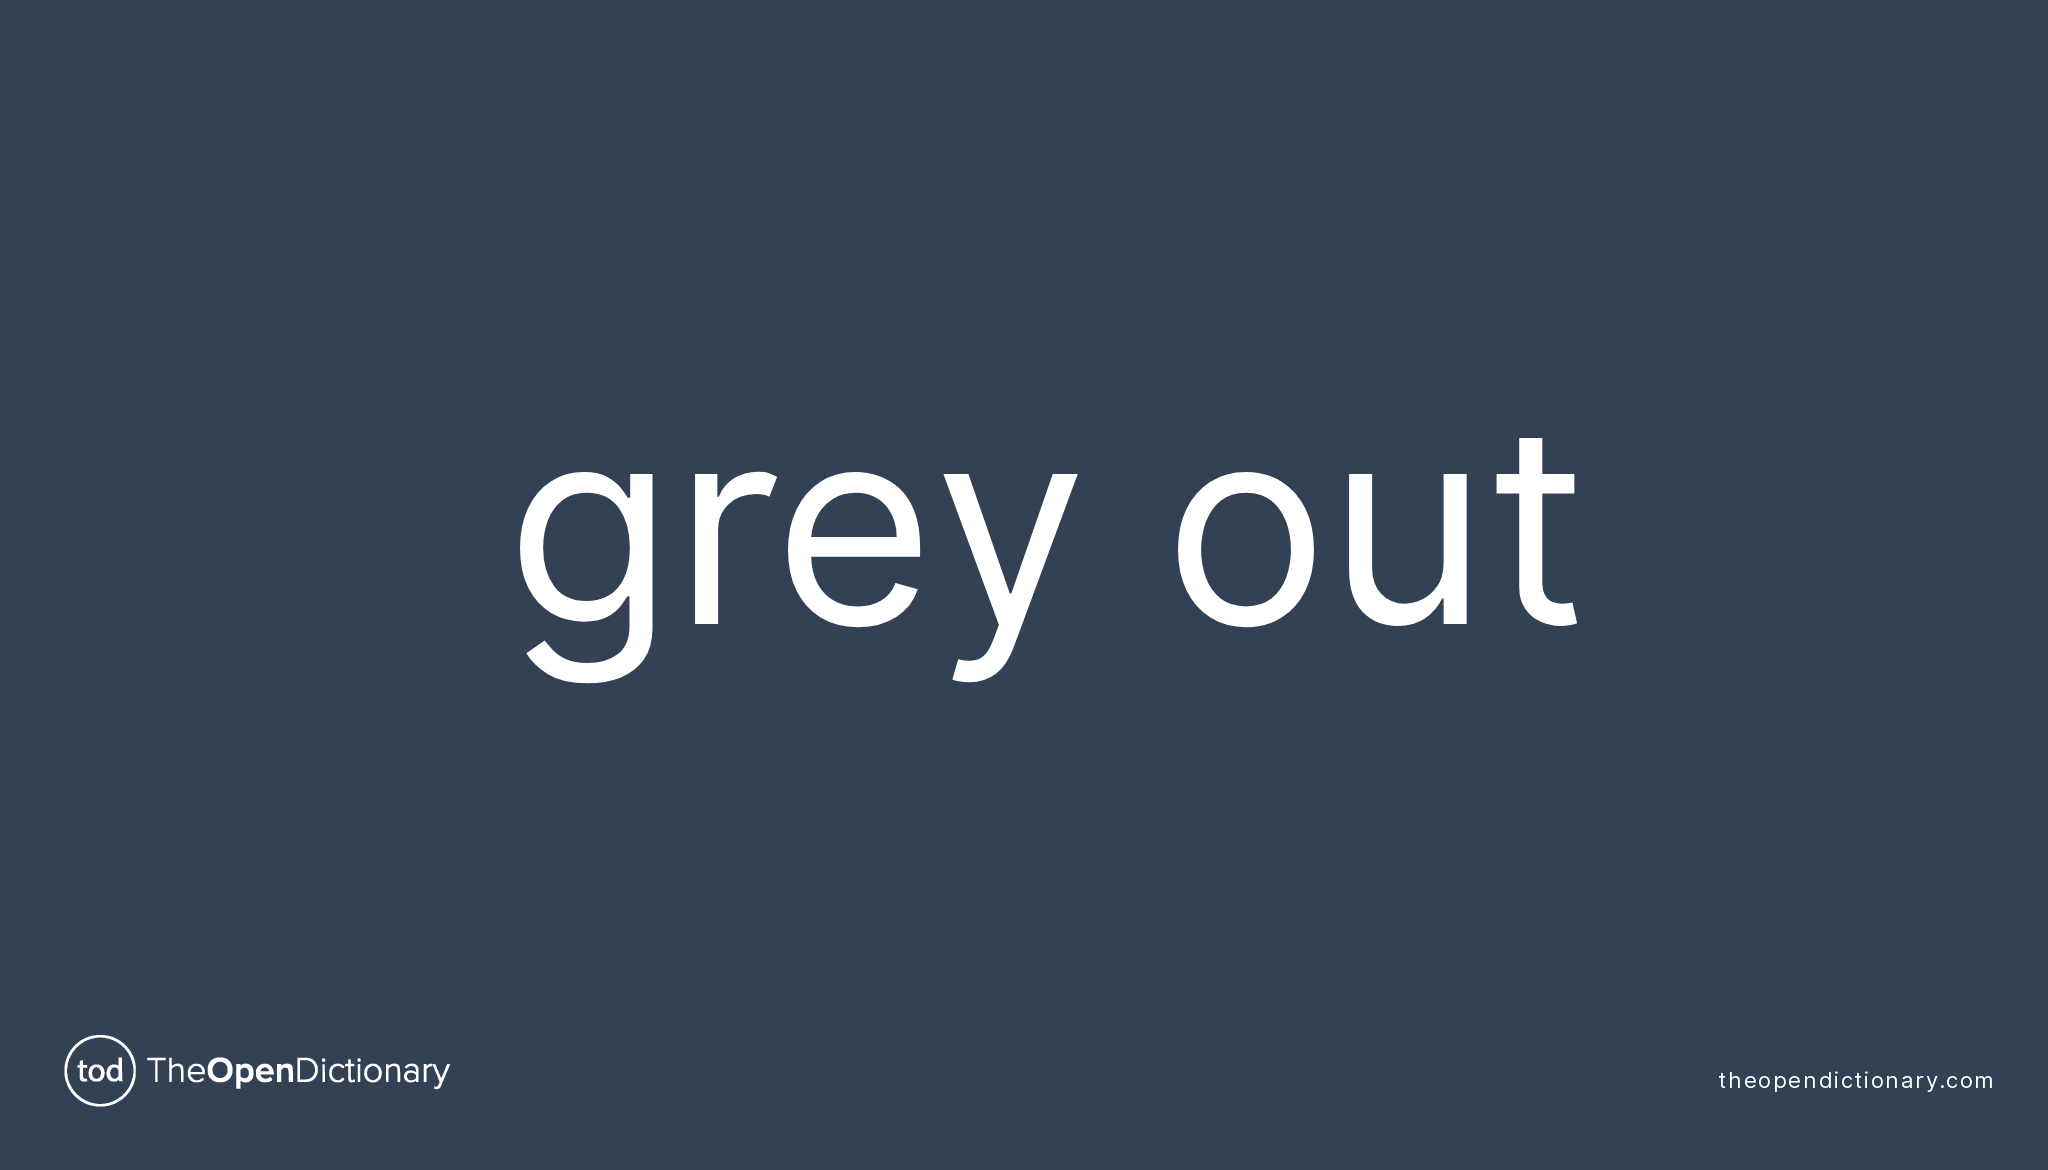 GREY OUT Phrasal Verb GREY OUT Definition, Meaning and Example